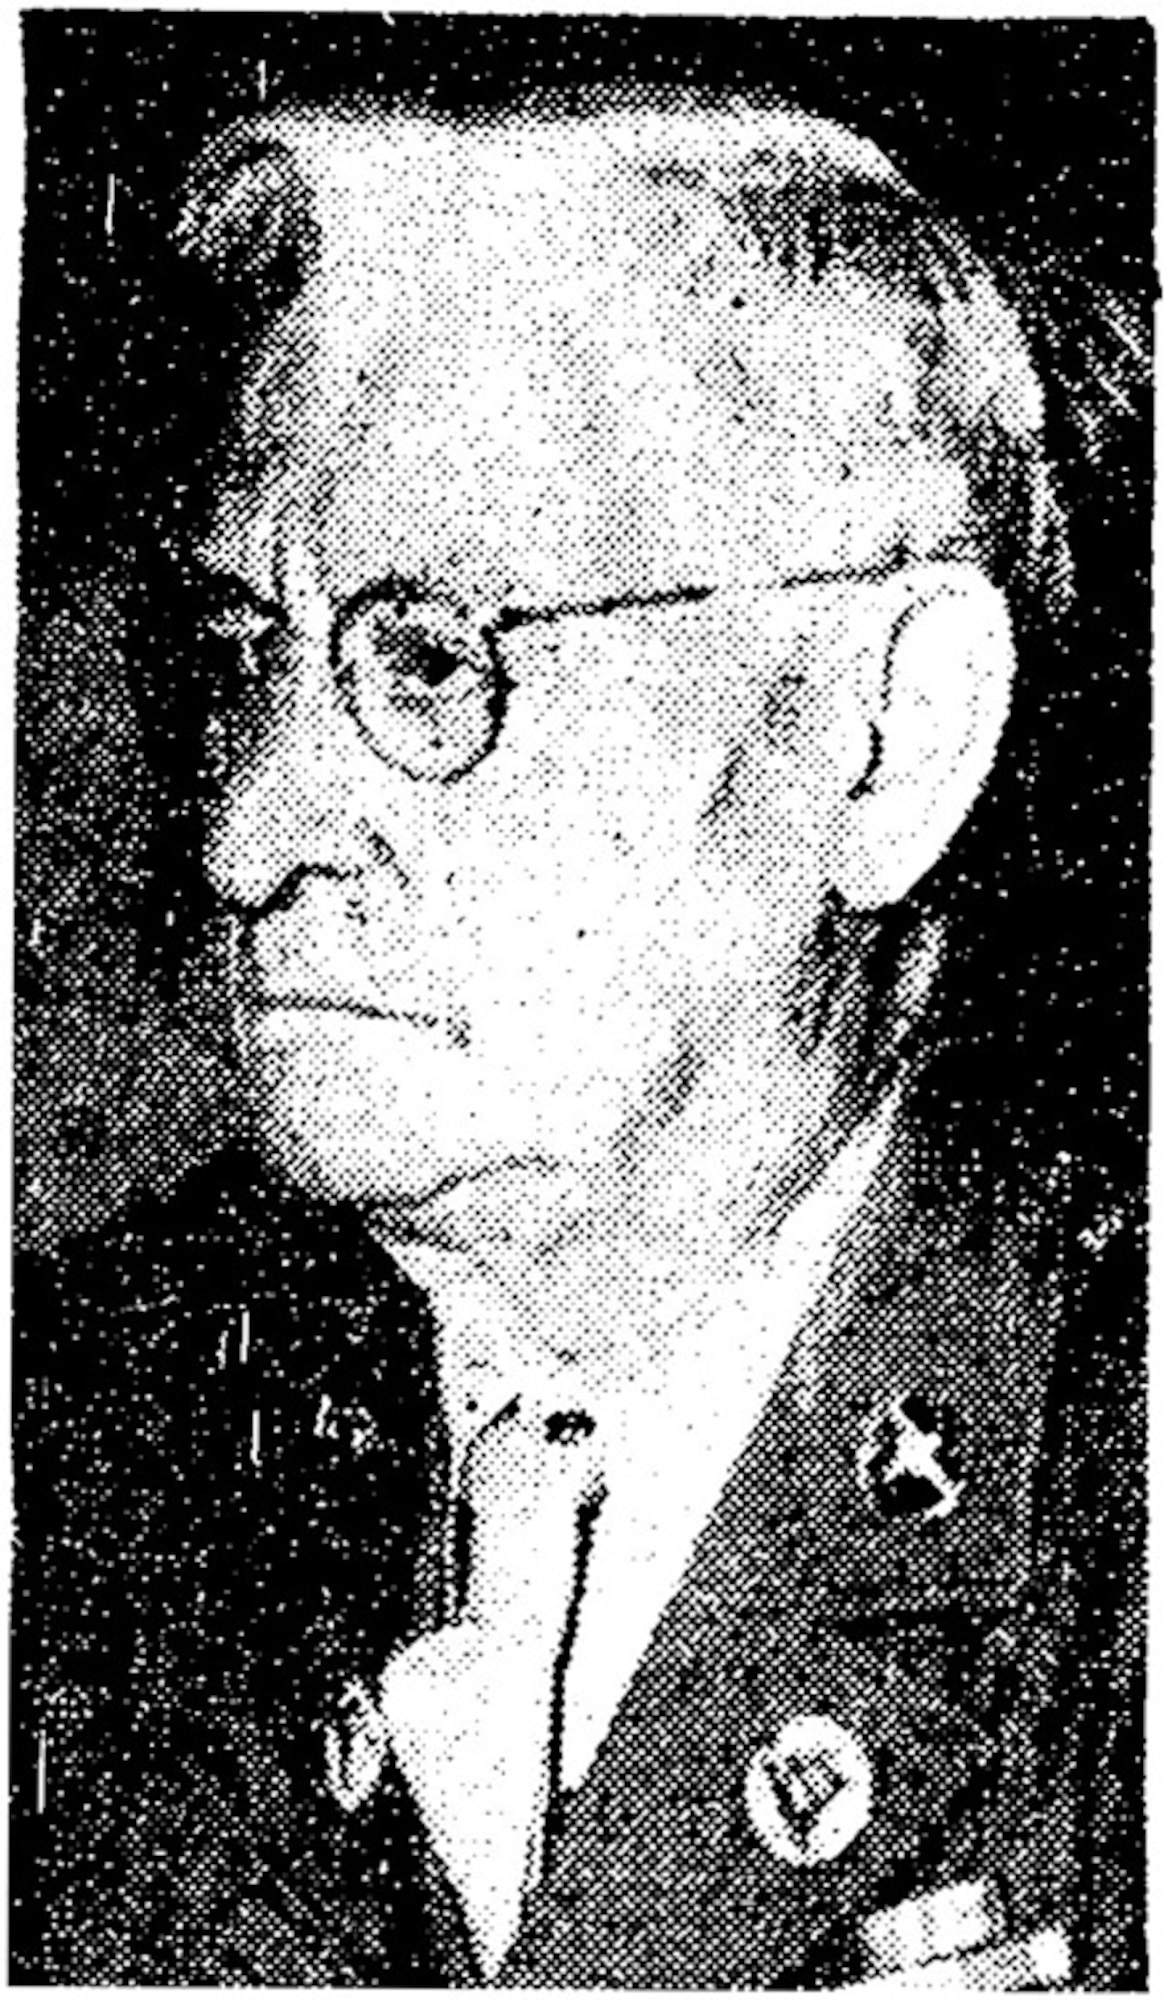 U.S. Army Air Forces Master Sgt. John W. Westervelt is seen this image taken from a 1946 news article that reported on Westervelt’s death at age 78. He had retired from the military the previous year, at age 77. One of the oldest people to ever serve as a member of the modern U.S. military, Westervelt re-enlisted for the ninth and final time at what is now known as Selfridge Air National Guard Base, Mich., on Aug. 9, 1941, about four months before the U.S. entered World War II. 